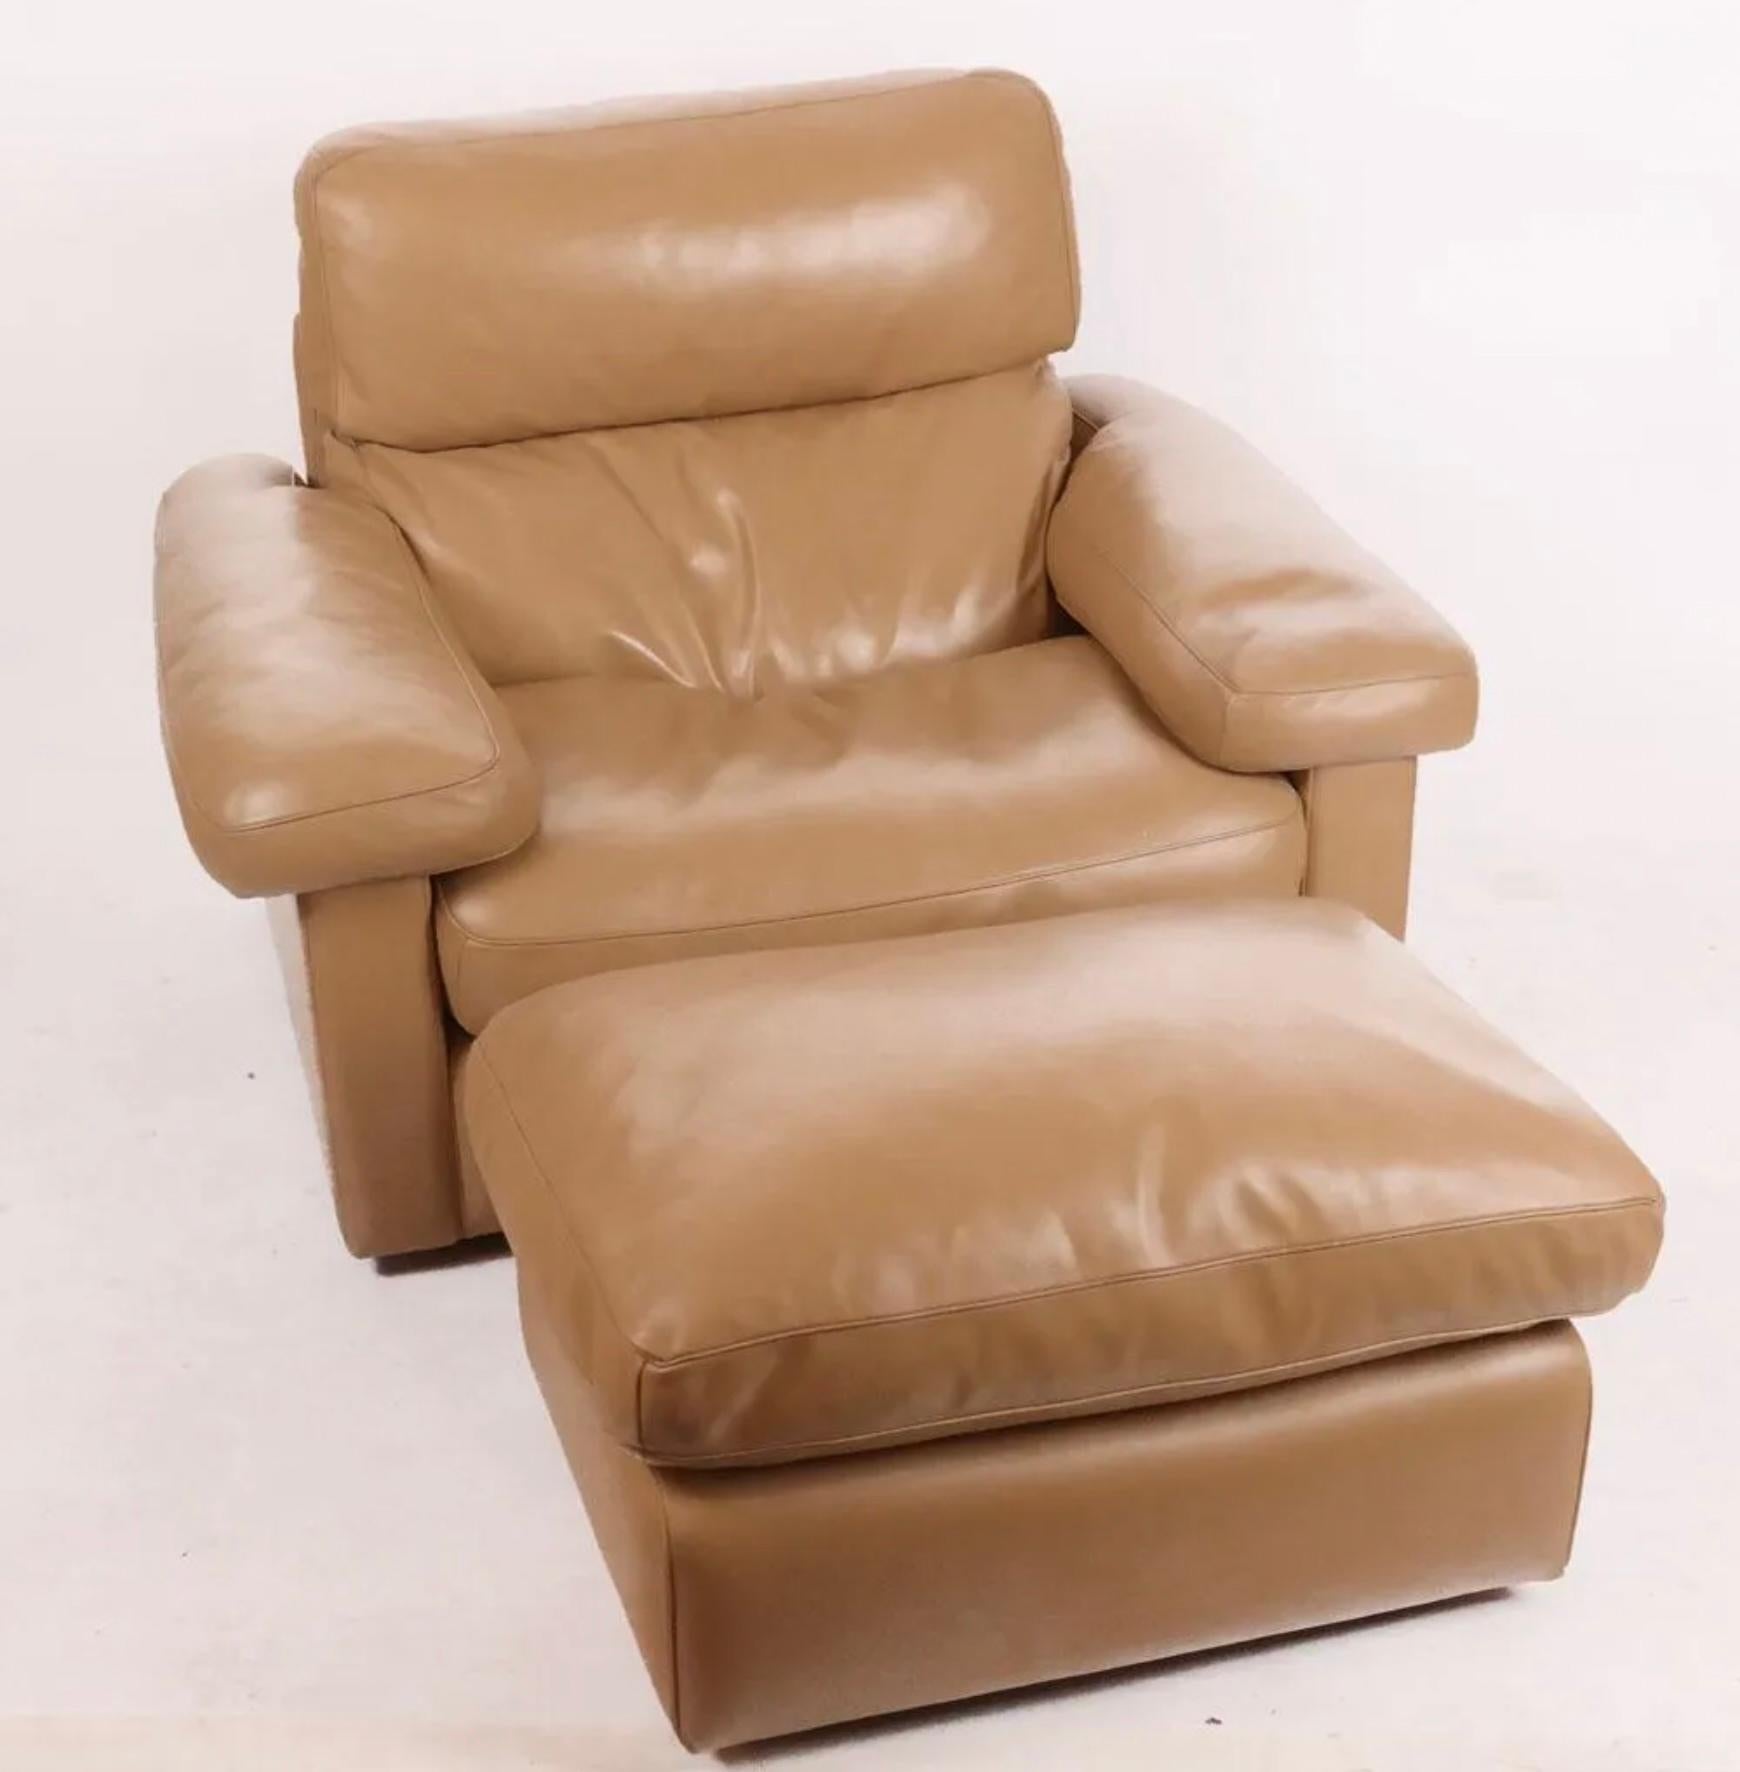 Vintage Mid-Century Modern Tan leather Lounge chair with matching ottoman by Tito Agnoli for Poltrona Frau Italy, circa 1970. Low Modern designed lounge chair with ottoman - Very soft Tan leather puffy cushions. Super comfortable chair with great